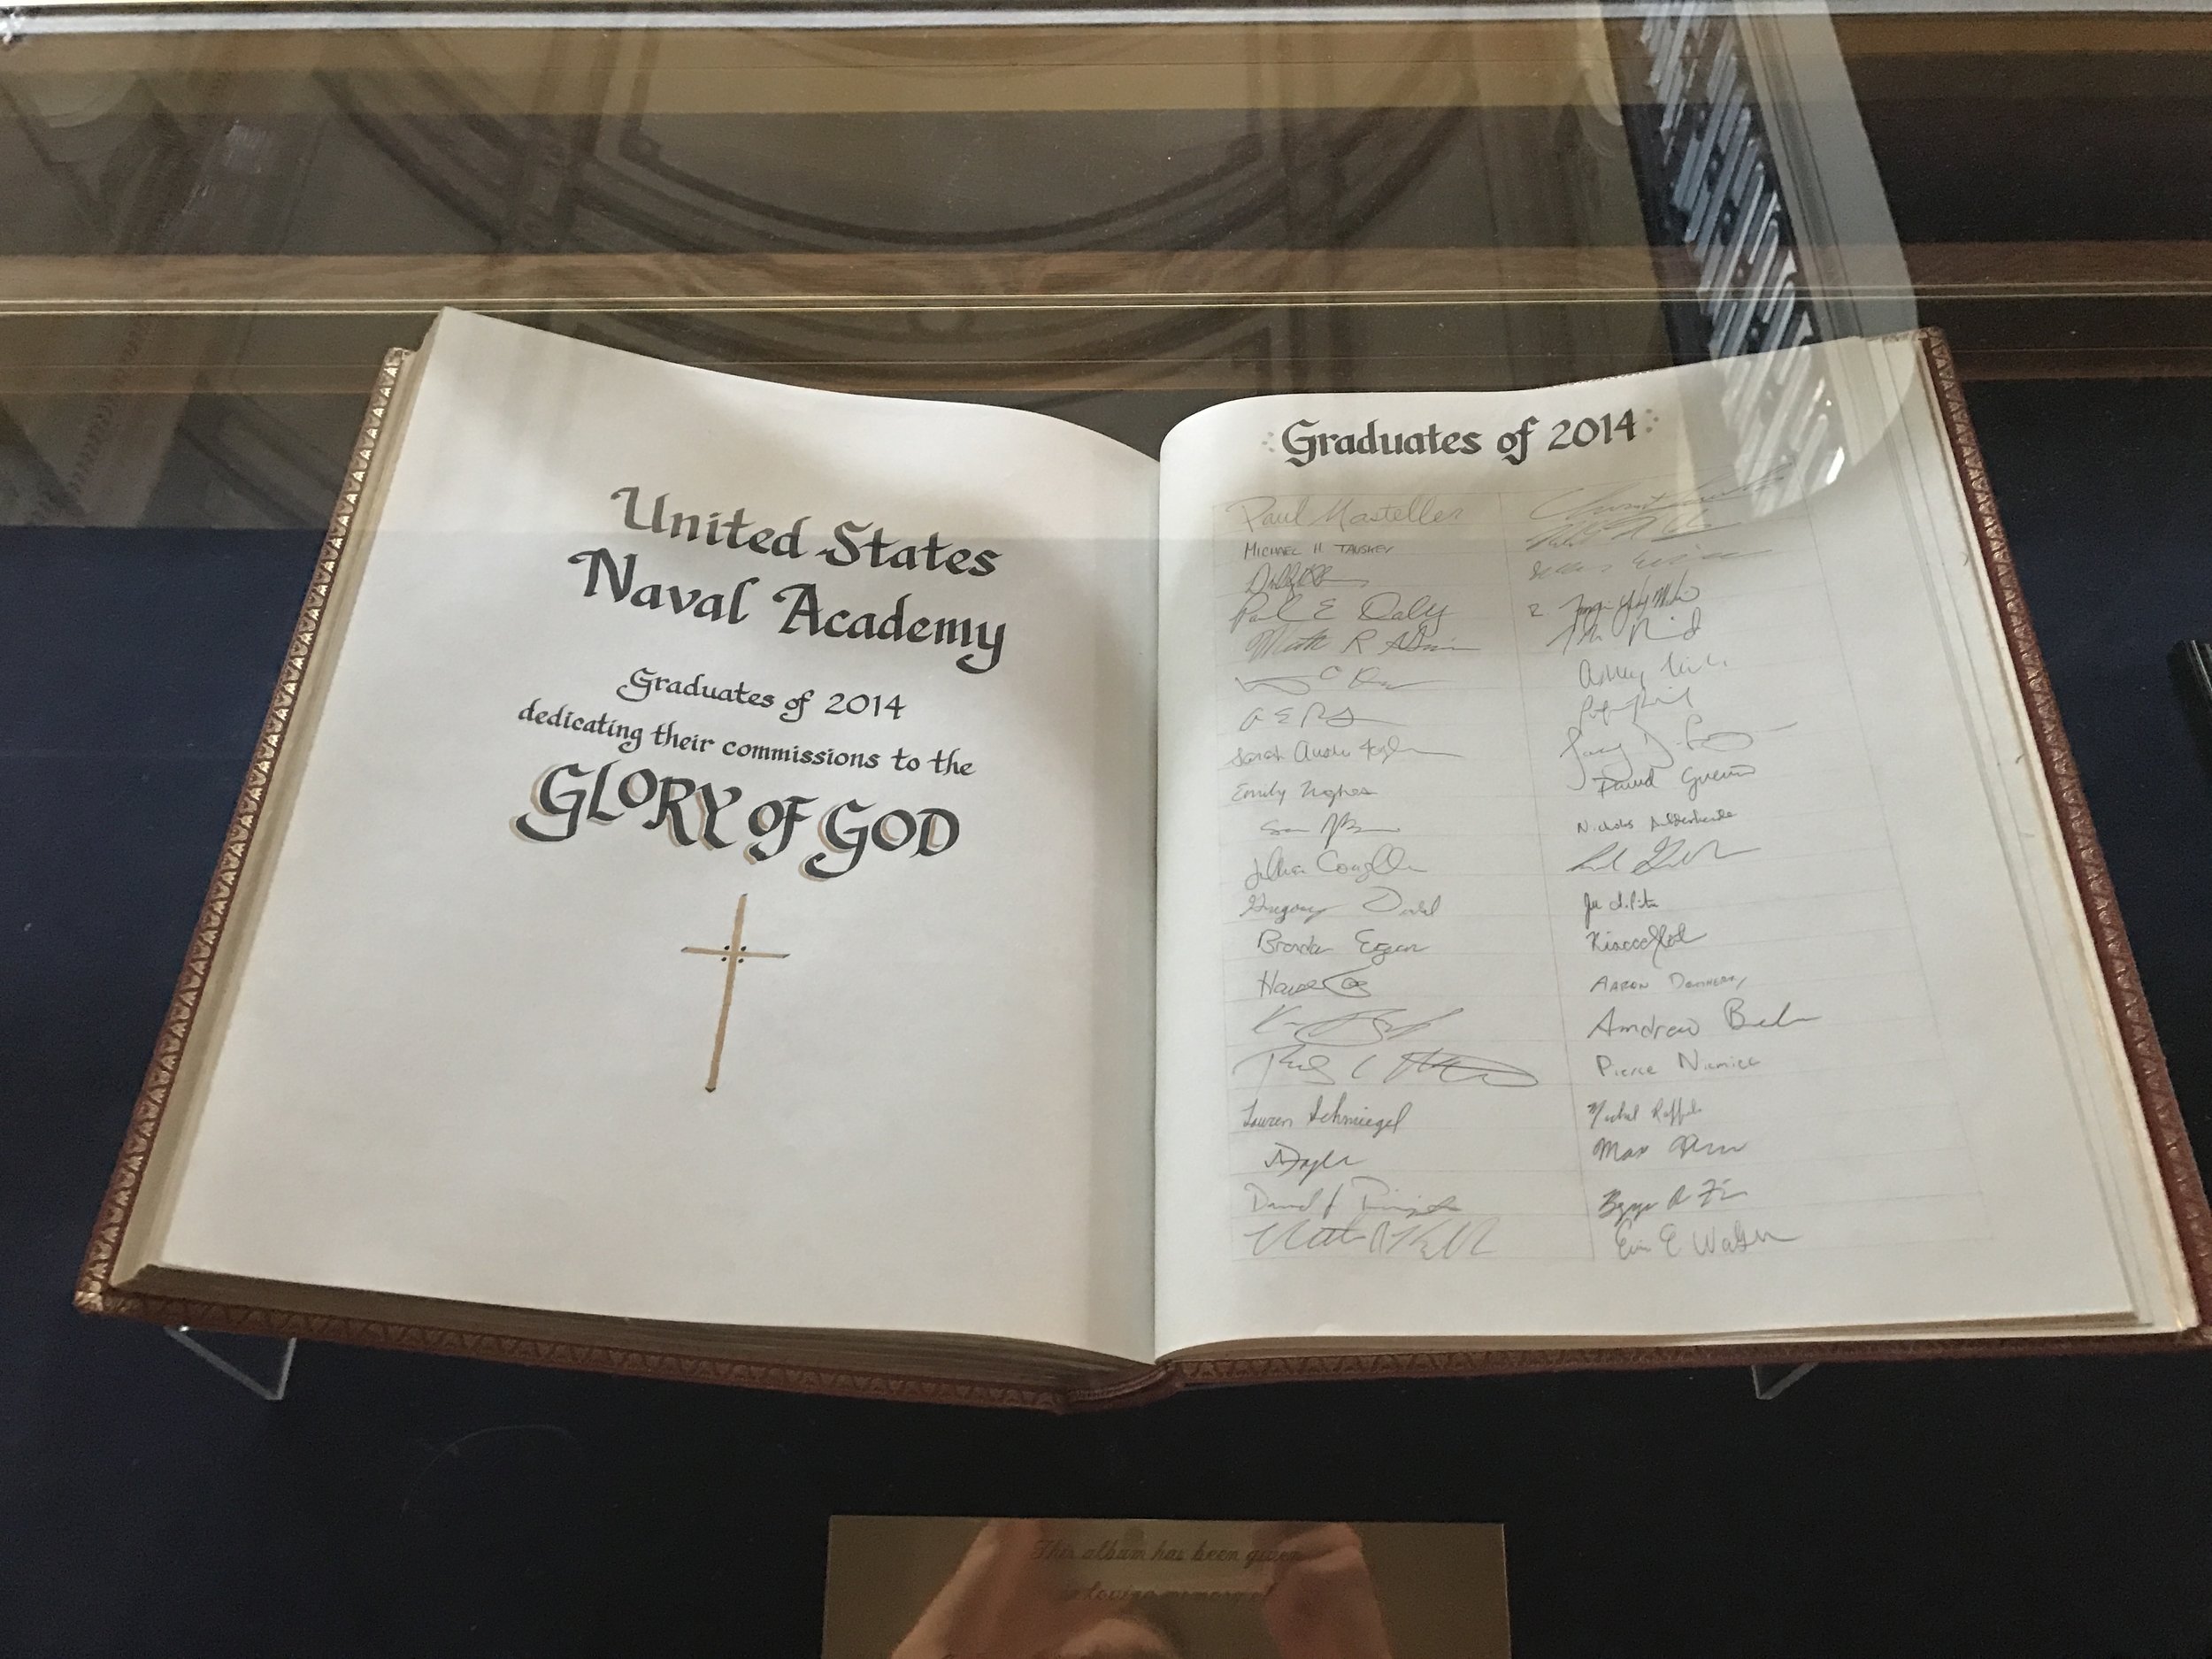 Prayer Book at the United States Naval Academy Chapel